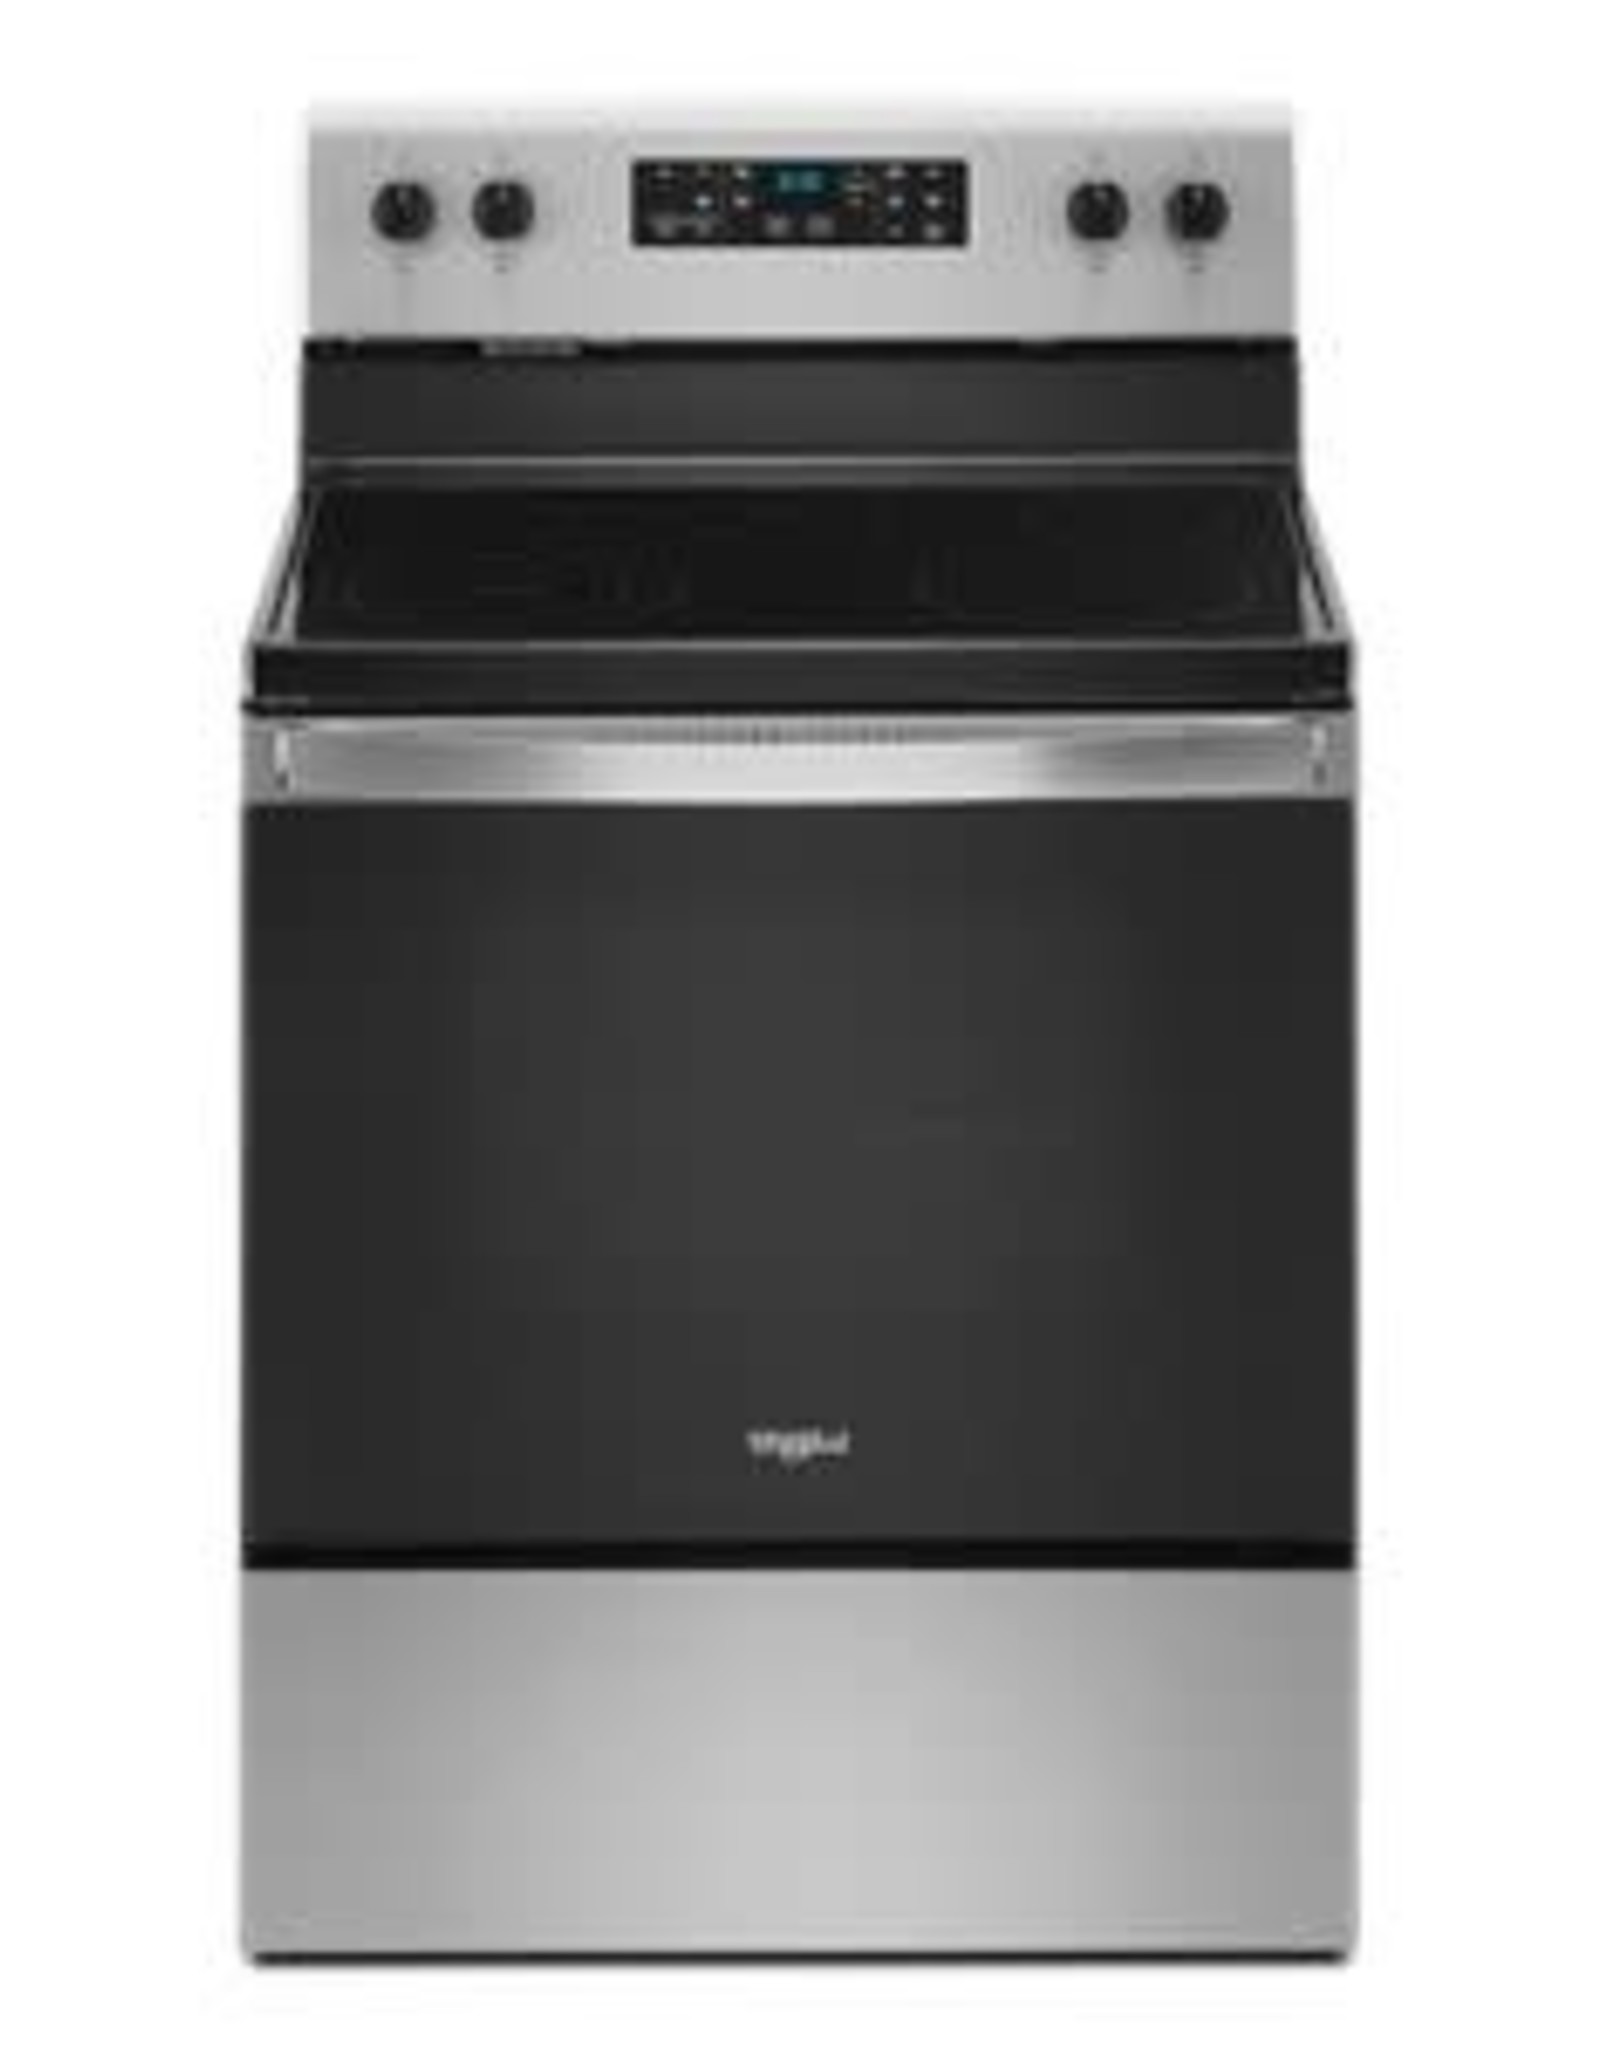 WHIRLPOOL wfe505w0jz 30 in. 5.3 cu. ft. Electric Range with 5-Elements and Frozen Bake Technology in Stainless Steel